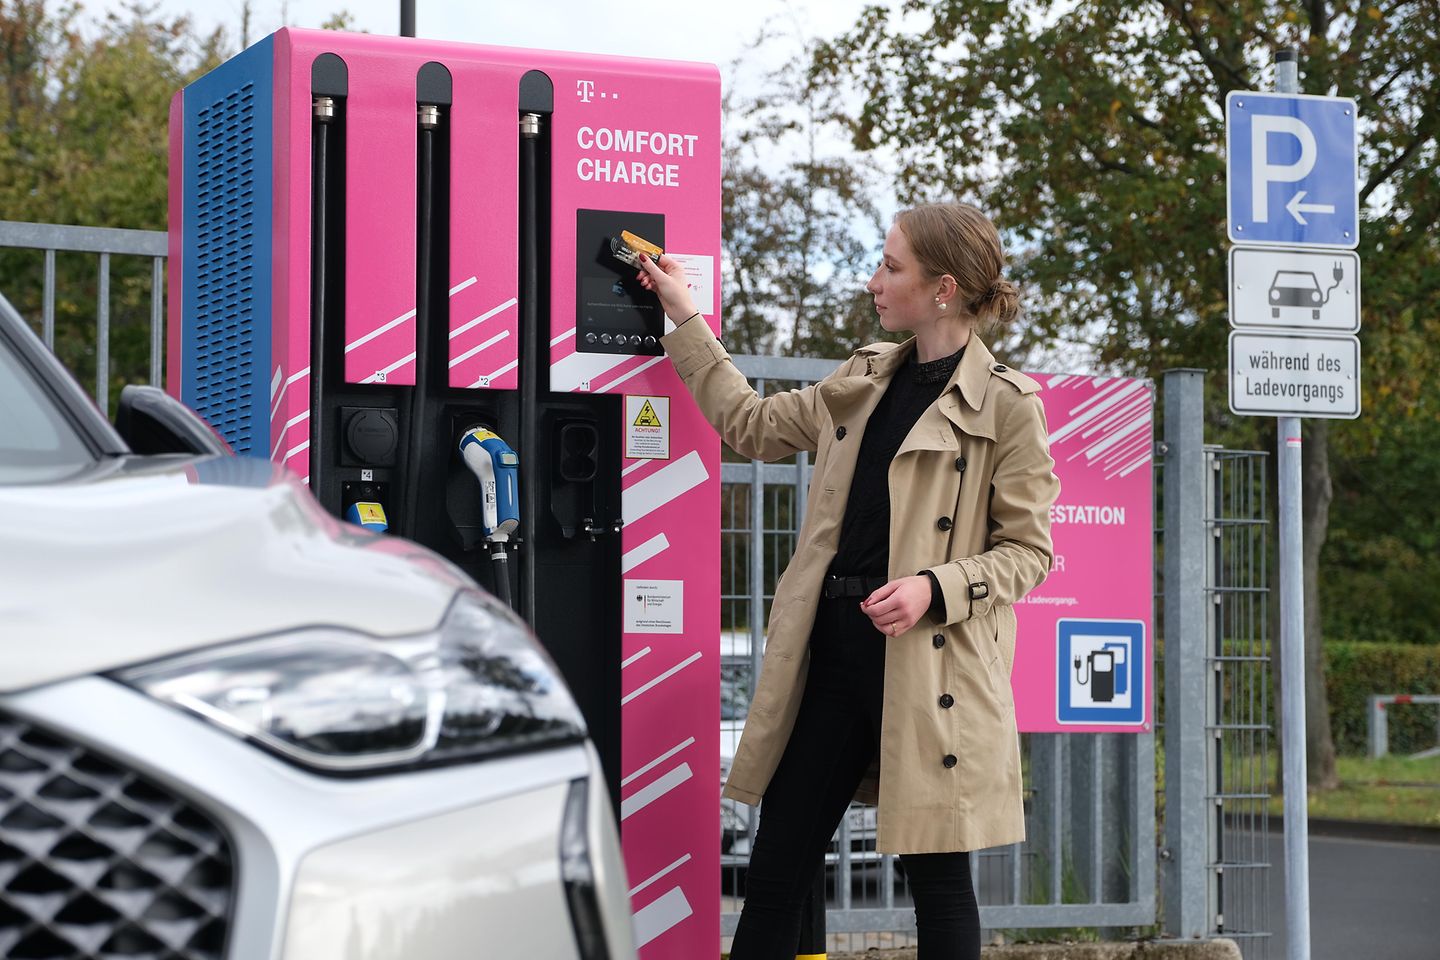 A woman holds a card in front of a charging station